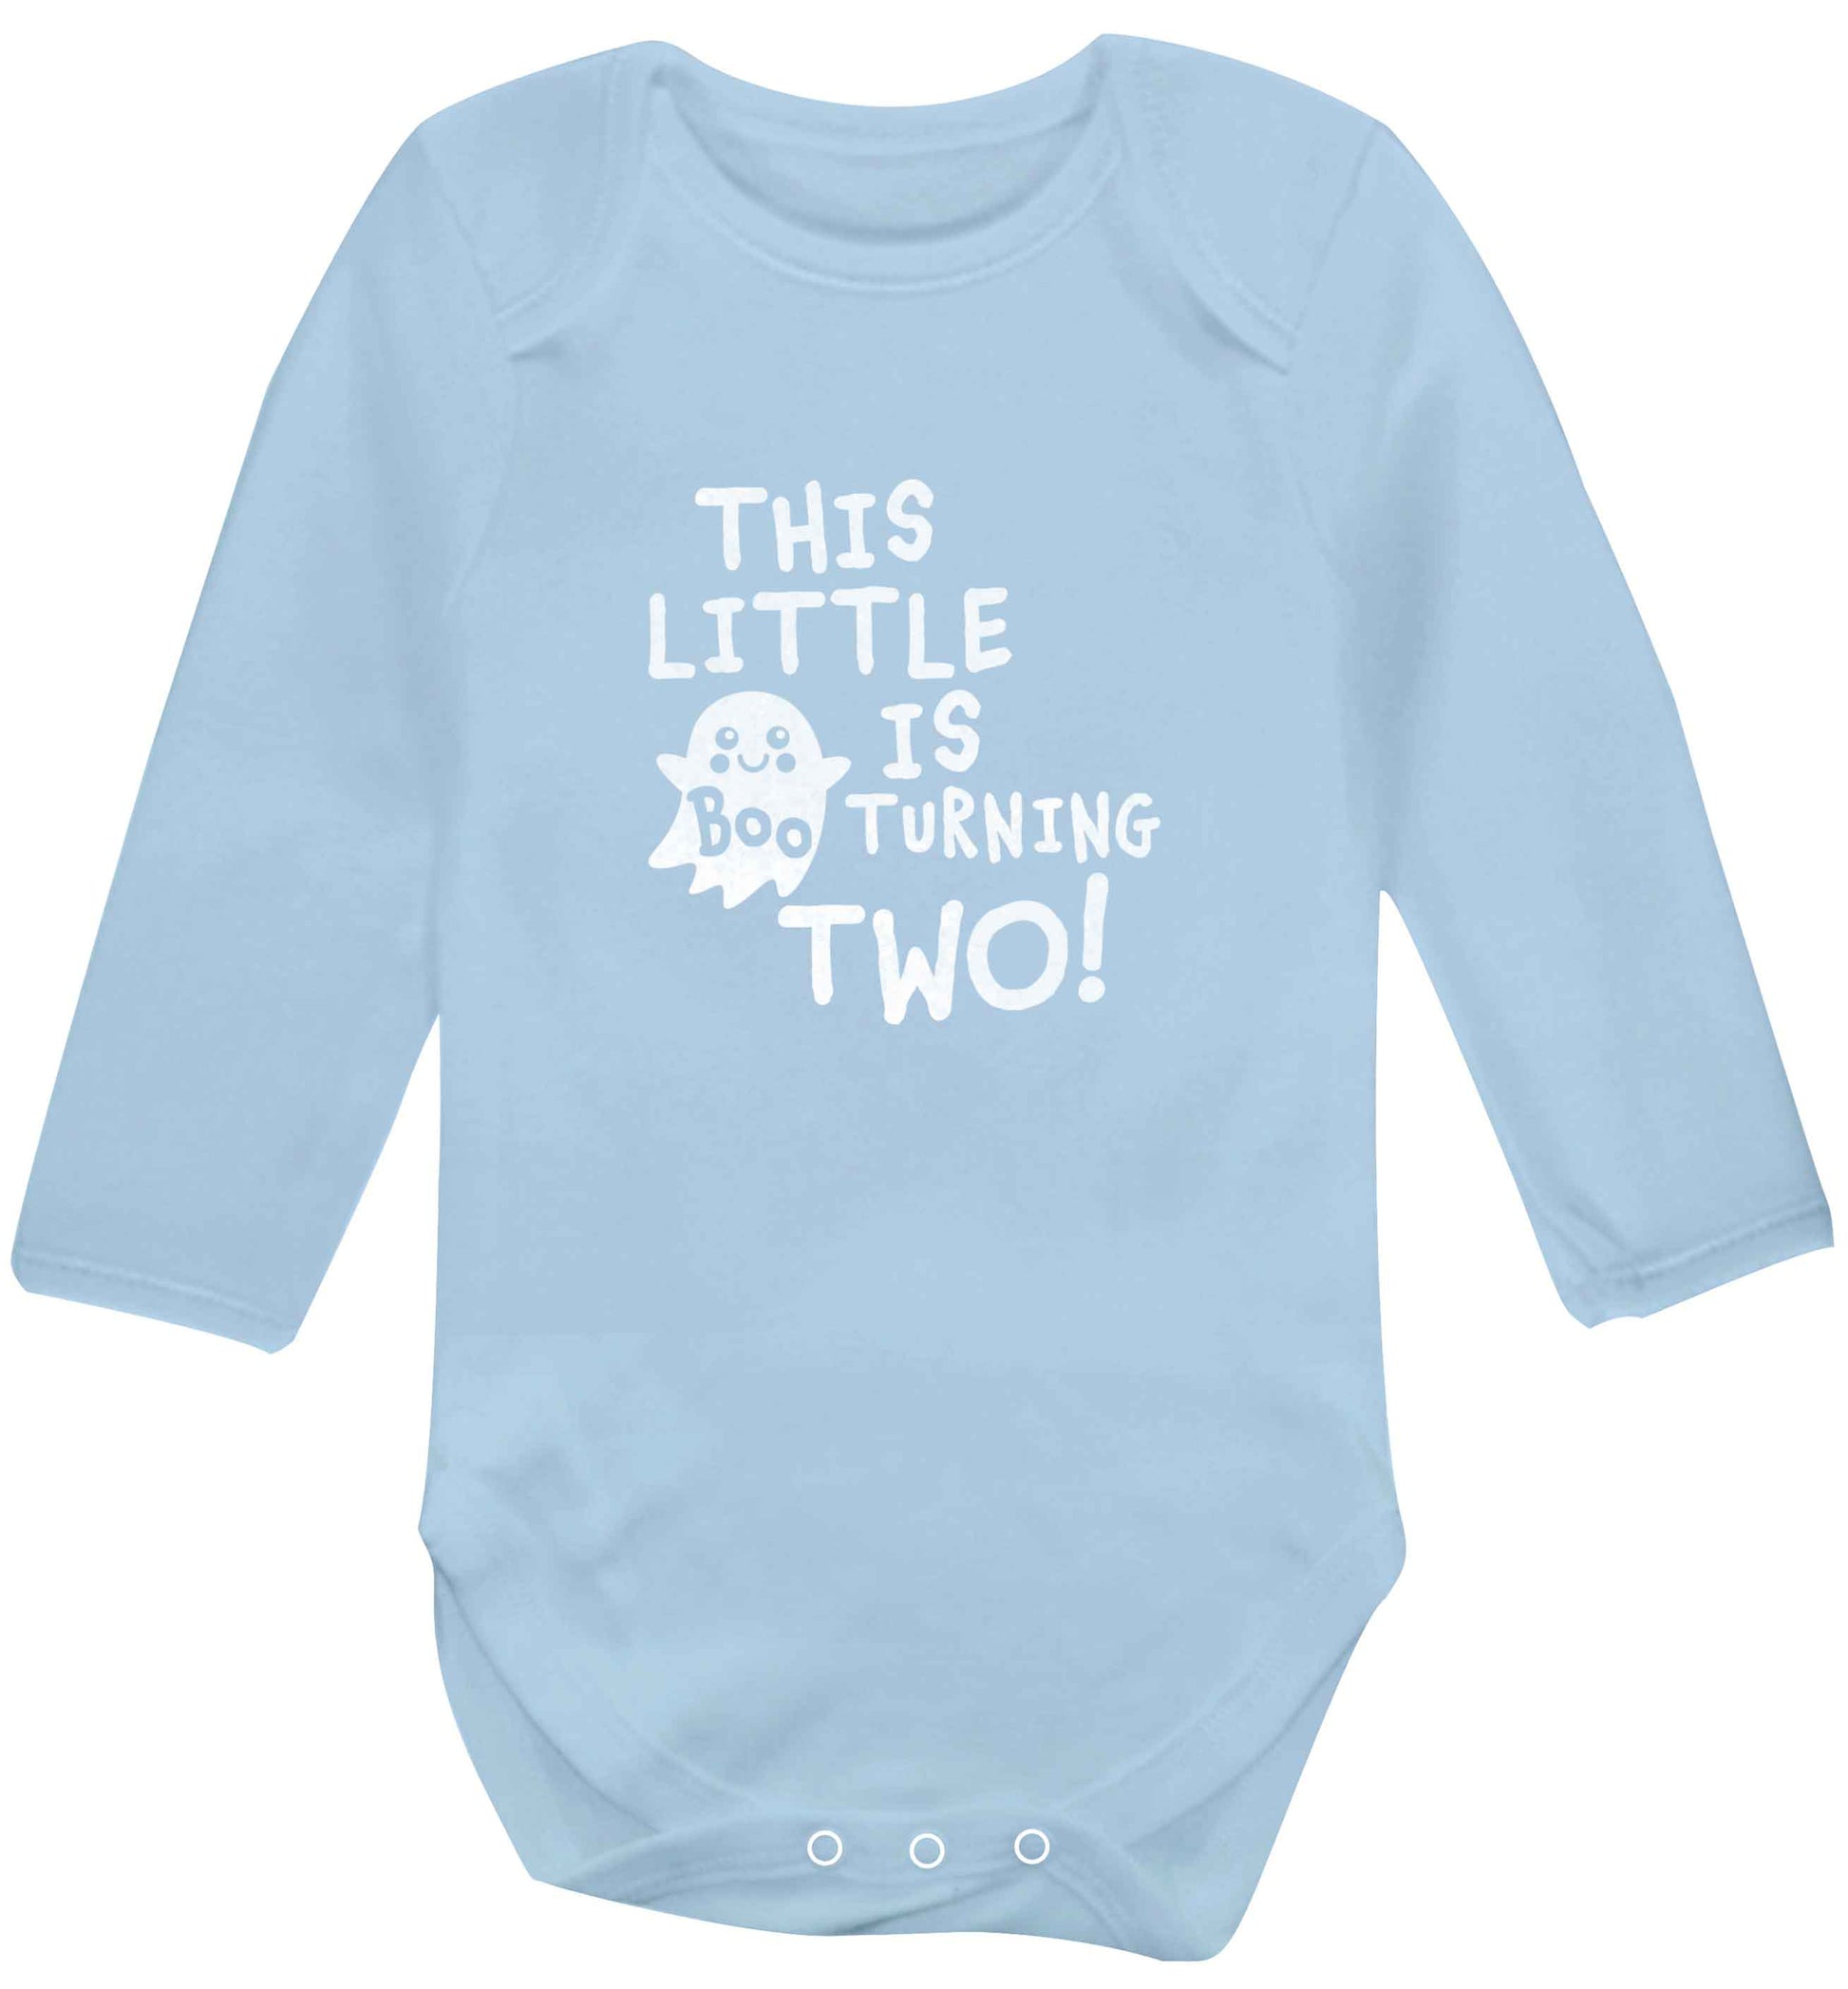 This little boo is turning two baby vest long sleeved pale blue 6-12 months